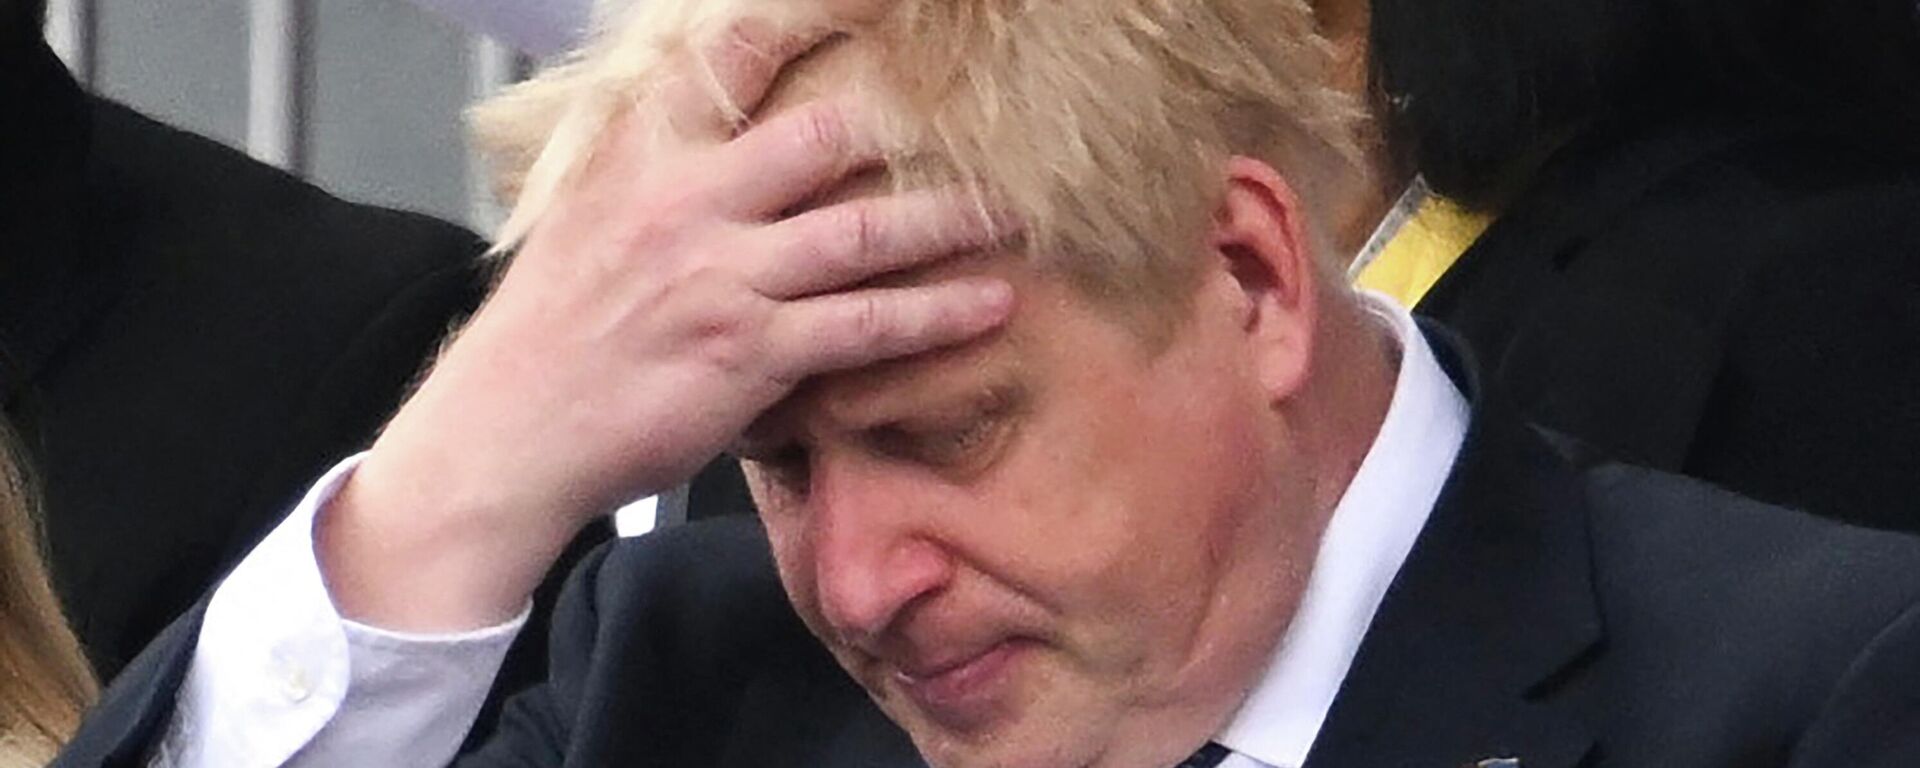 (FILES) In this file photo taken on June 5, 2022 shows Britain's Prime Minister Boris Johnson reacts during the Platinum Pageant in London on June 5, 2022 as part of Queen Elizabeth II's platinum jubilee celebrations - Sputnik International, 1920, 04.07.2022